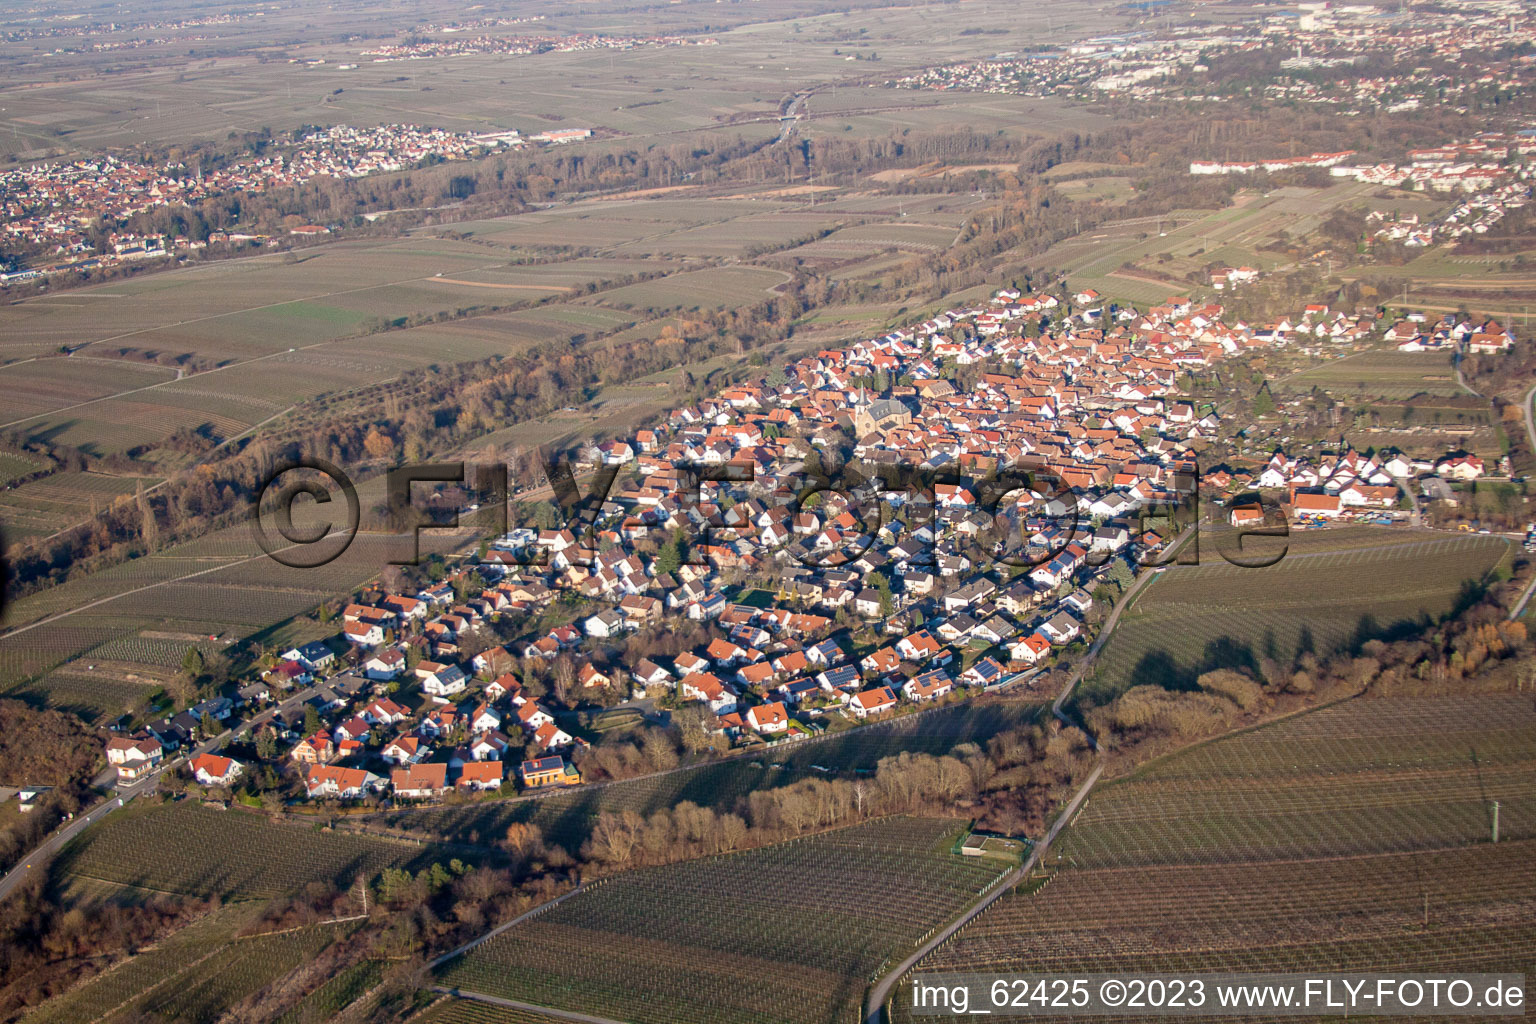 From the southwest in the district Arzheim in Landau in der Pfalz in the state Rhineland-Palatinate, Germany